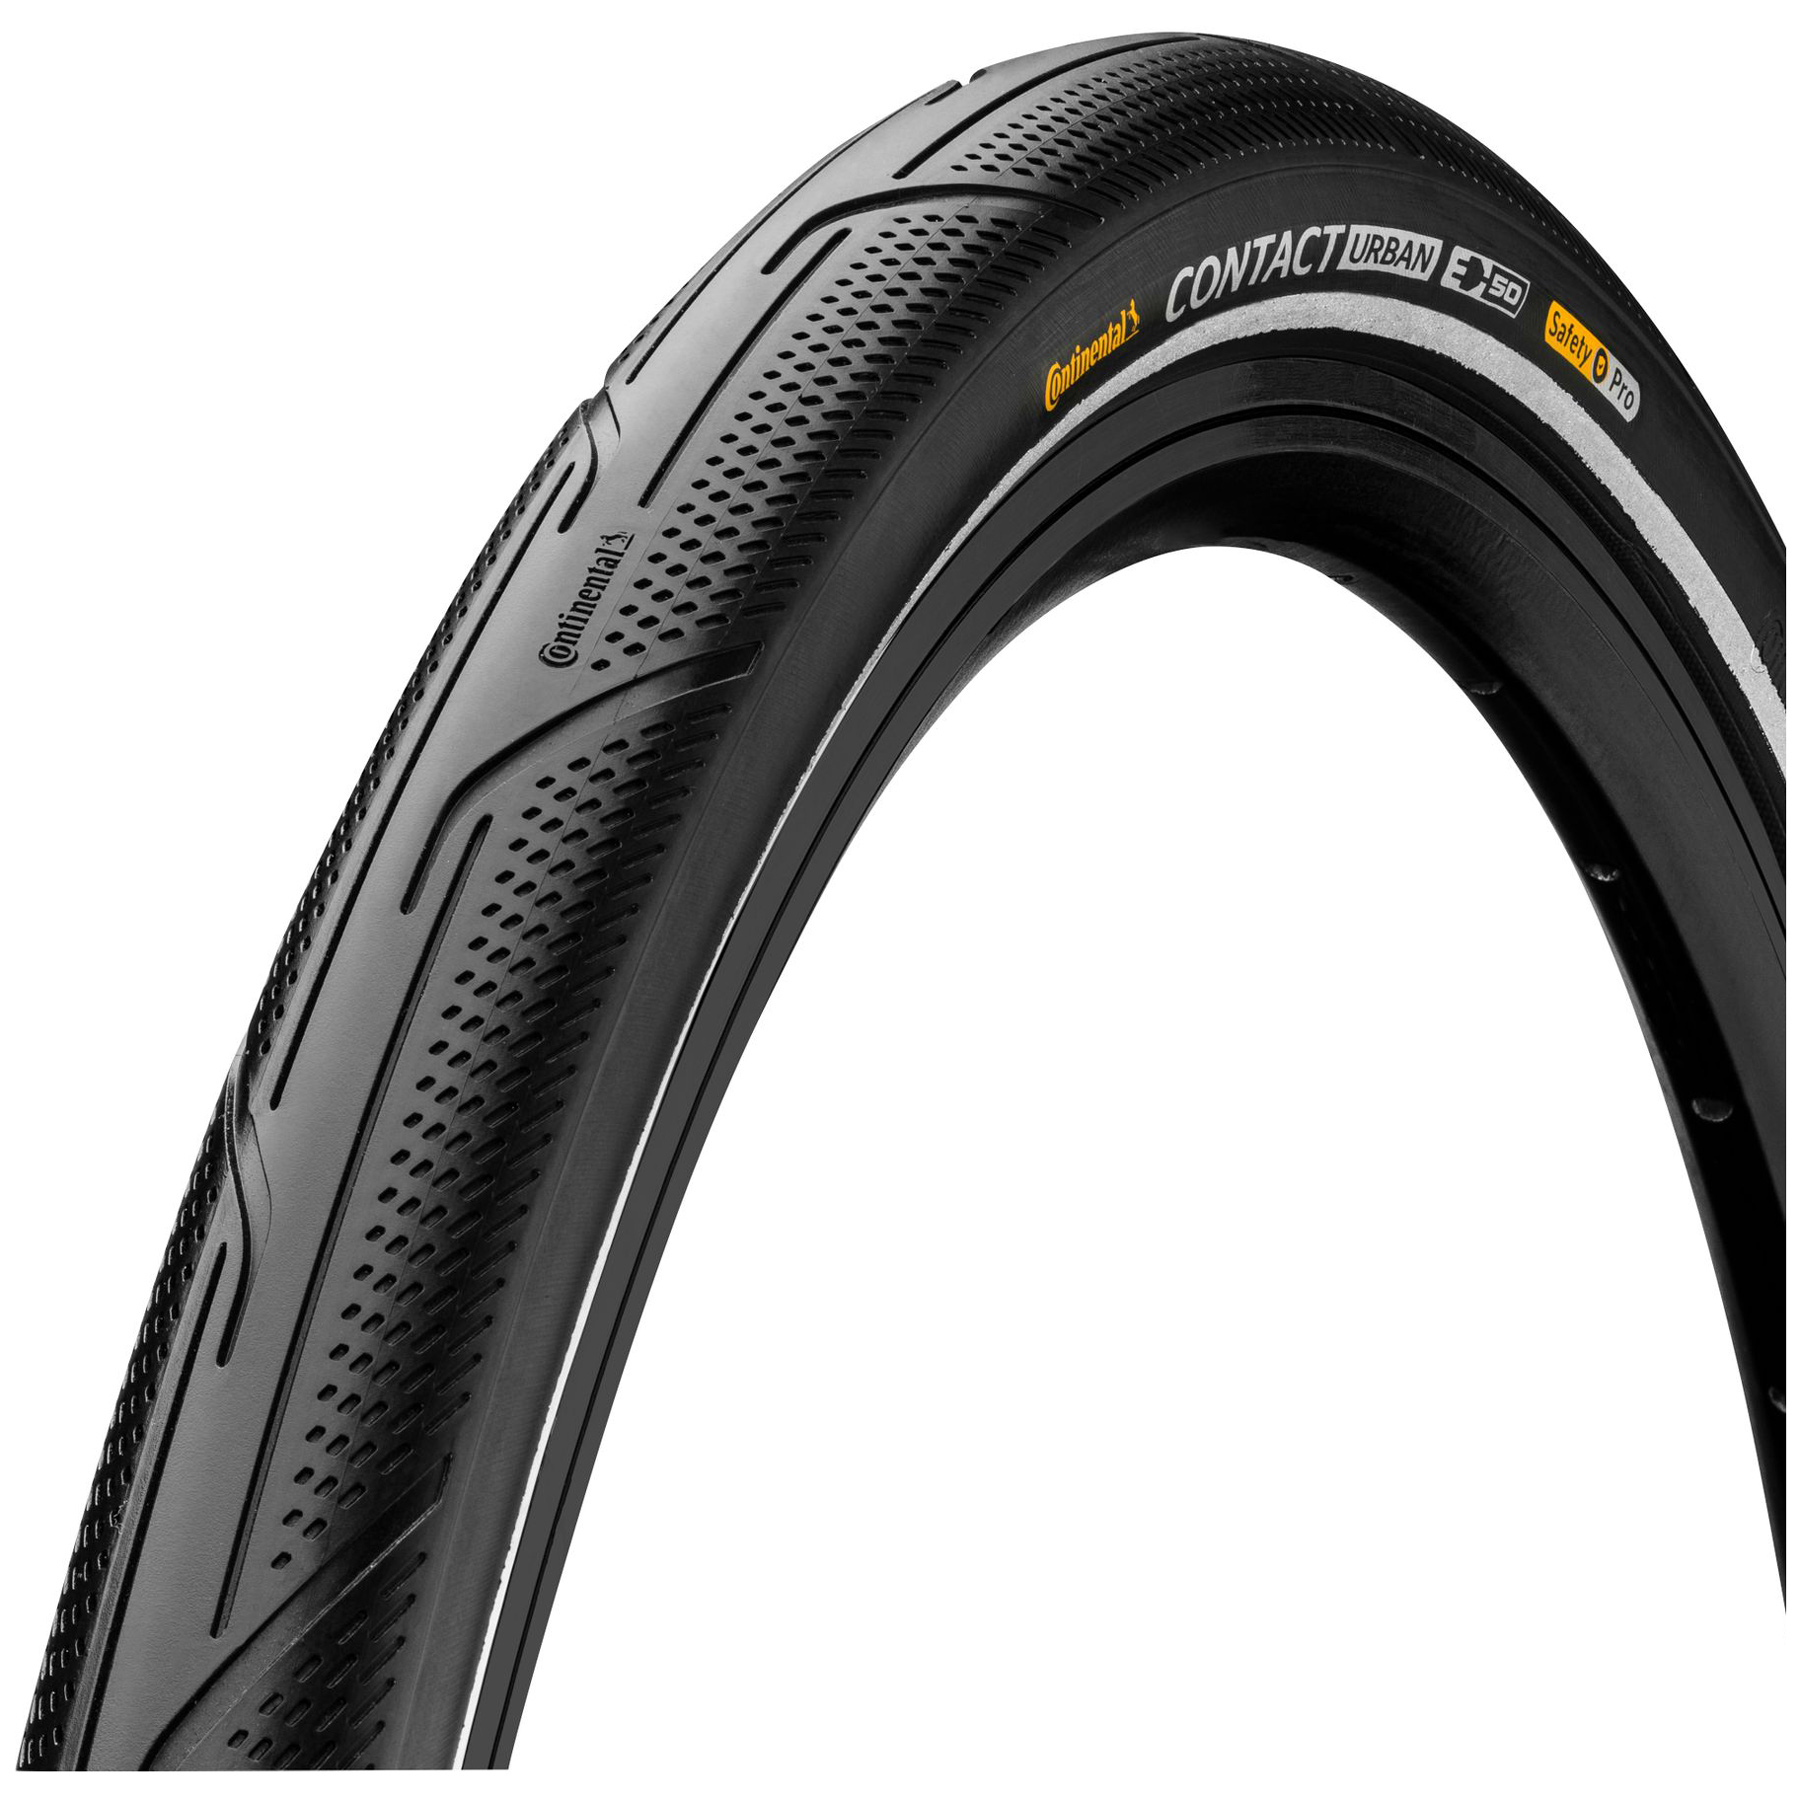 Image of Continental Contact Urban Wire Bead Tire - PureGrip | black reflective - ECE-R75 - 42-584